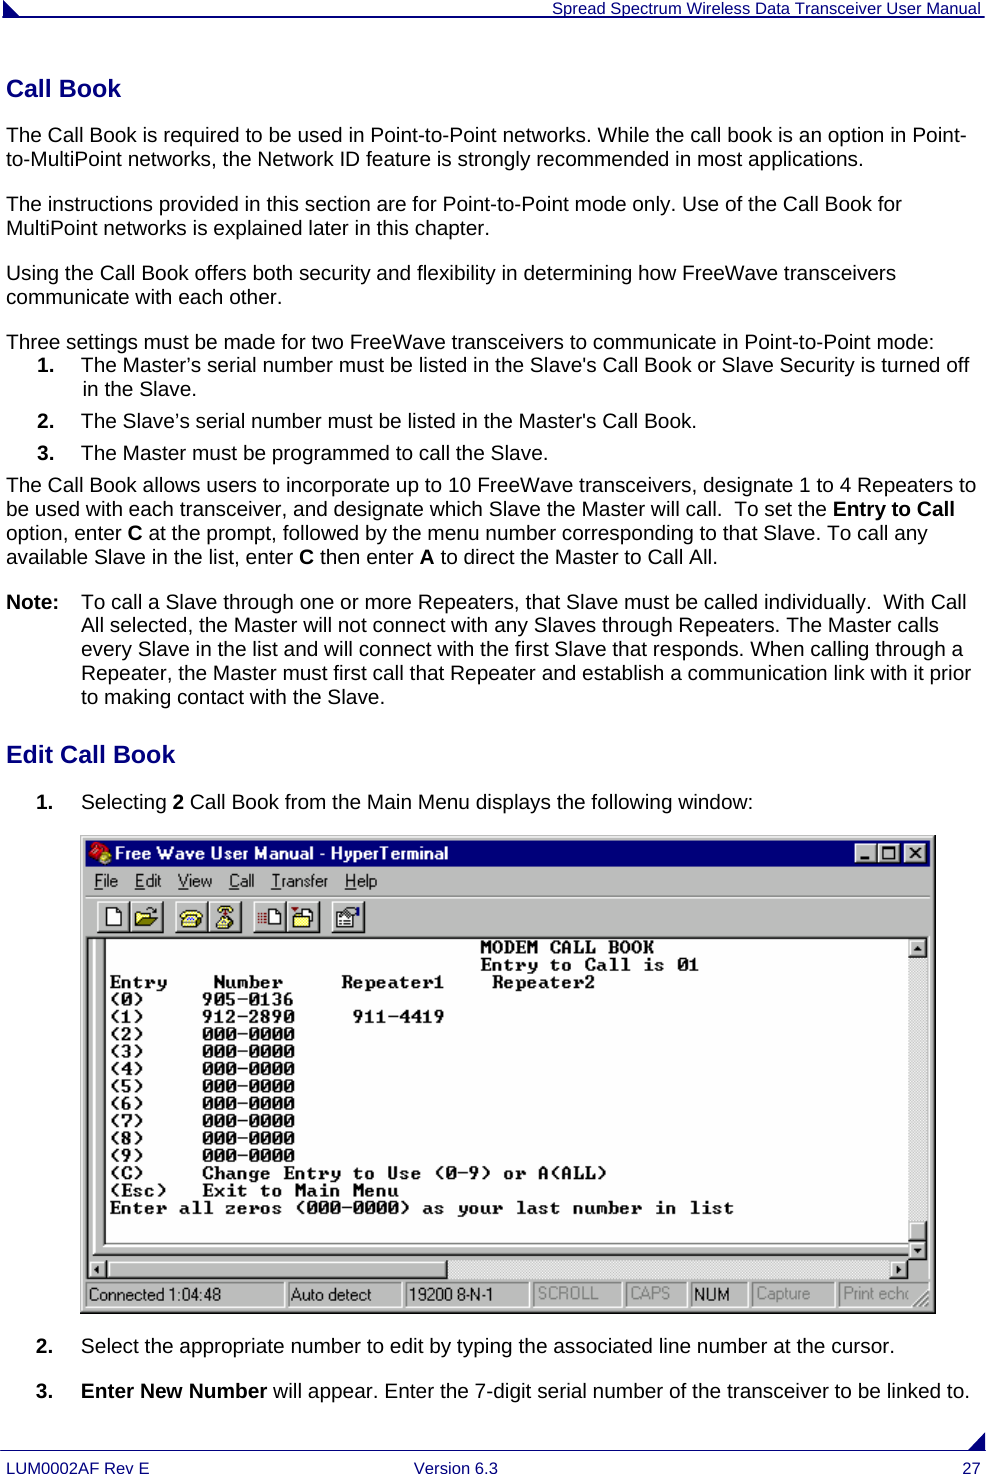  Spread Spectrum Wireless Data Transceiver User Manual LUM0002AF Rev E  Version 6.3  27 Call Book  The Call Book is required to be used in Point-to-Point networks. While the call book is an option in Point-to-MultiPoint networks, the Network ID feature is strongly recommended in most applications.  The instructions provided in this section are for Point-to-Point mode only. Use of the Call Book for MultiPoint networks is explained later in this chapter. Using the Call Book offers both security and flexibility in determining how FreeWave transceivers communicate with each other.  Three settings must be made for two FreeWave transceivers to communicate in Point-to-Point mode: 1.  The Master’s serial number must be listed in the Slave&apos;s Call Book or Slave Security is turned off in the Slave. 2.  The Slave’s serial number must be listed in the Master&apos;s Call Book. 3.  The Master must be programmed to call the Slave. The Call Book allows users to incorporate up to 10 FreeWave transceivers, designate 1 to 4 Repeaters to be used with each transceiver, and designate which Slave the Master will call.  To set the Entry to Call option, enter C at the prompt, followed by the menu number corresponding to that Slave. To call any available Slave in the list, enter C then enter A to direct the Master to Call All. Note:  To call a Slave through one or more Repeaters, that Slave must be called individually.  With Call All selected, the Master will not connect with any Slaves through Repeaters. The Master calls every Slave in the list and will connect with the first Slave that responds. When calling through a Repeater, the Master must first call that Repeater and establish a communication link with it prior to making contact with the Slave.  Edit Call Book                                                                                                                                      1.  Selecting 2 Call Book from the Main Menu displays the following window:  2.  Select the appropriate number to edit by typing the associated line number at the cursor. 3. Enter New Number will appear. Enter the 7-digit serial number of the transceiver to be linked to. 